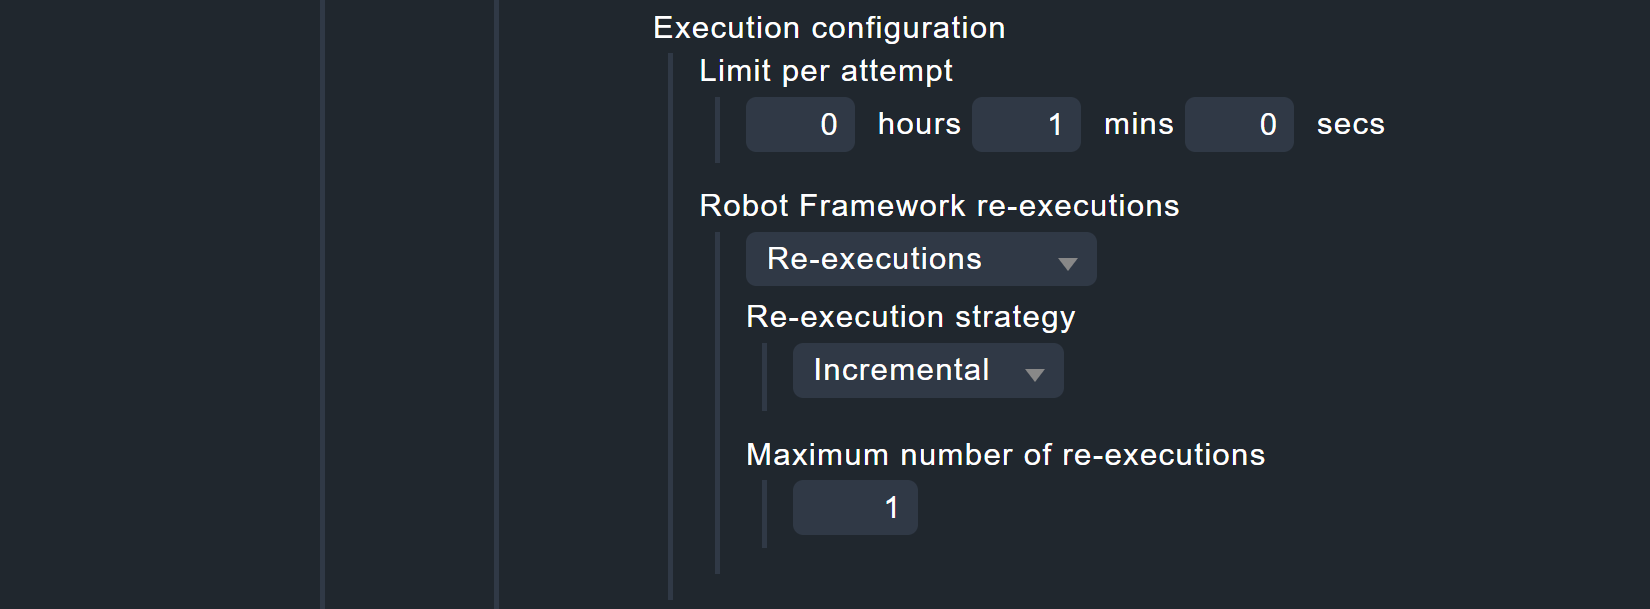 Configuration of execution runtimes and repetitions.